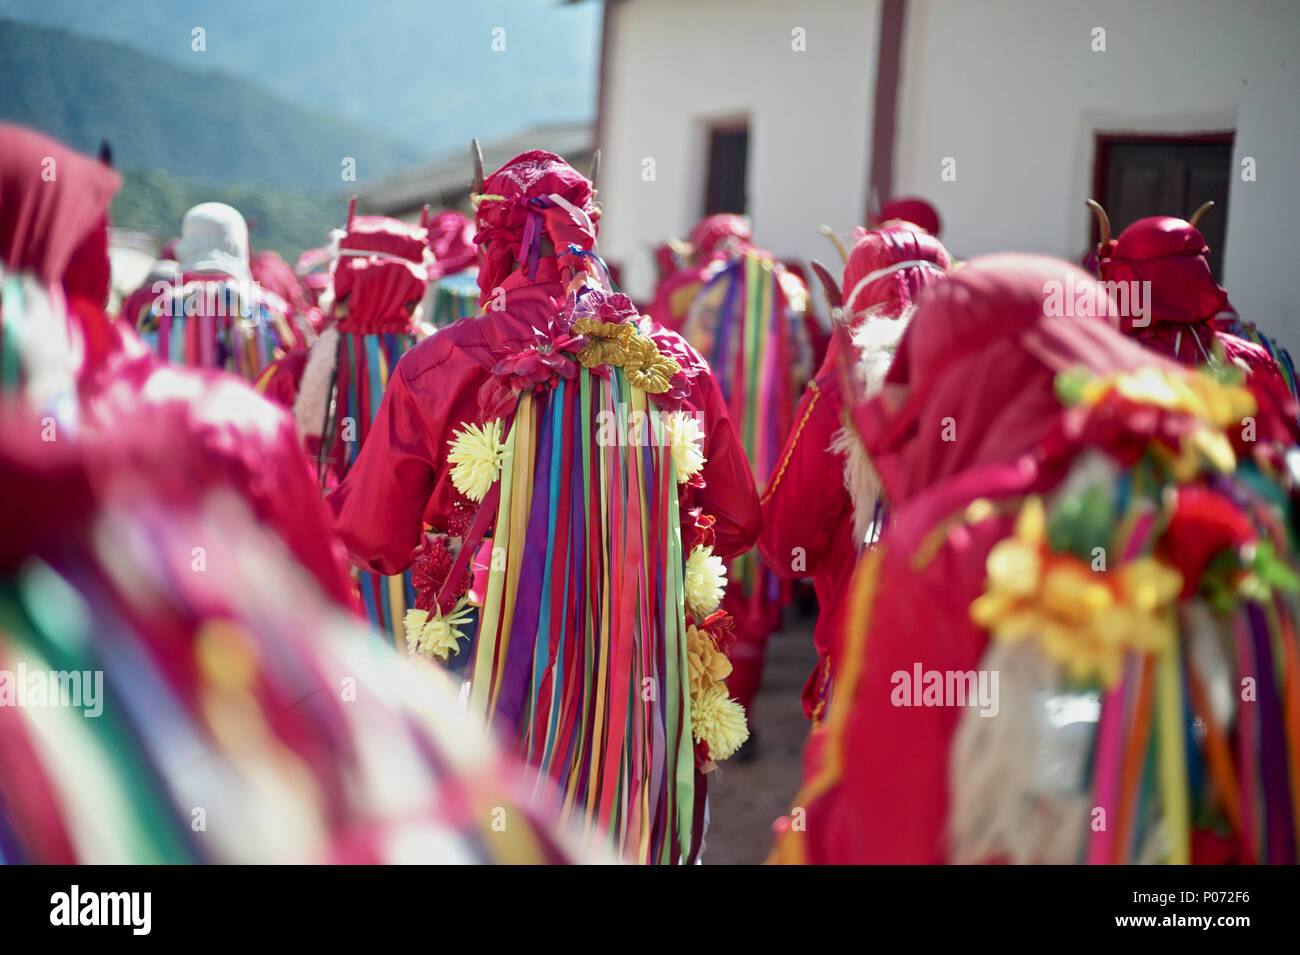 Atanquez, Cesar, Colombia. 31st May, 2018. At the foothill of the snow-covered peaks of Sierra Nevada, within the Kankuamo Indians territory, a colorful celebration of the Christian feast of Corpus Christi is held every year. It us a Christian religious event that normally coincides with the summer solstice. Pagan Demon characters, Indian sacred places and other Pre-Columbian features are incorporated. The ritual represents an allegorical fight between the God and the Devil."The Dance of the Devils"" is an ancient tradition kept for centuries in few communities on the Colombia's Caribbean c Stock Photo